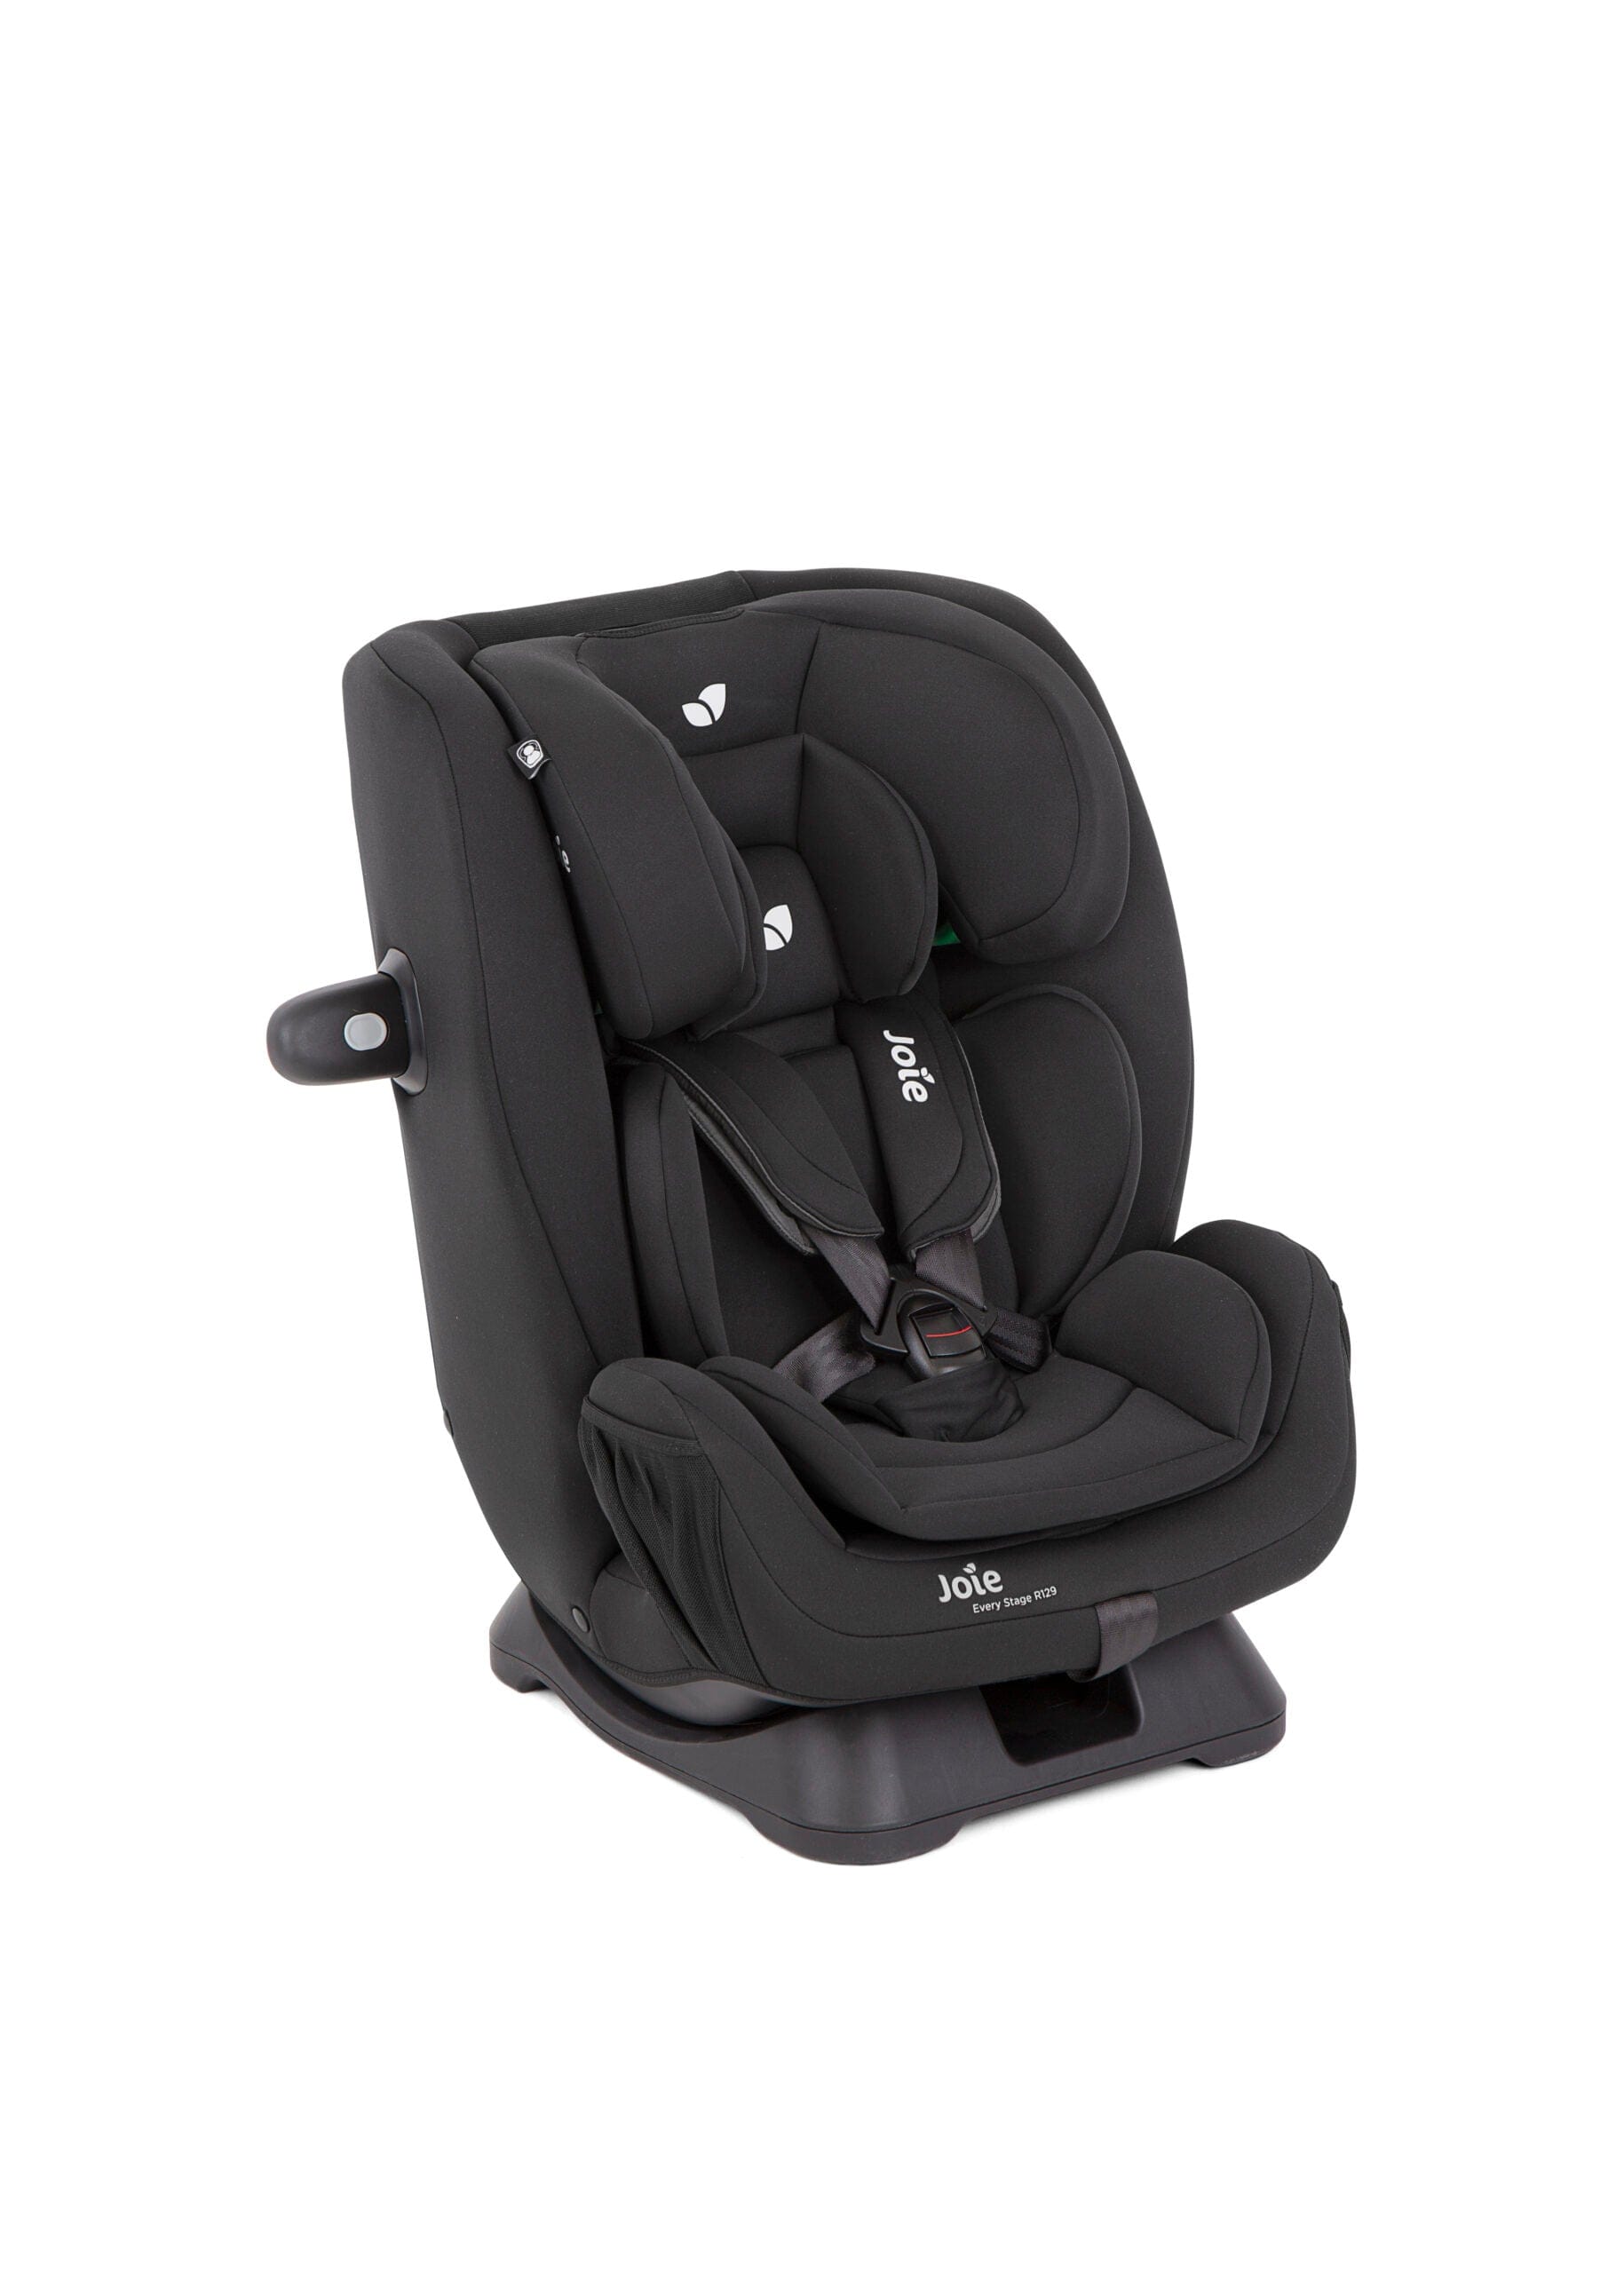 Joie combination car seats Every Stage R129 - Shale C2117AACBL000